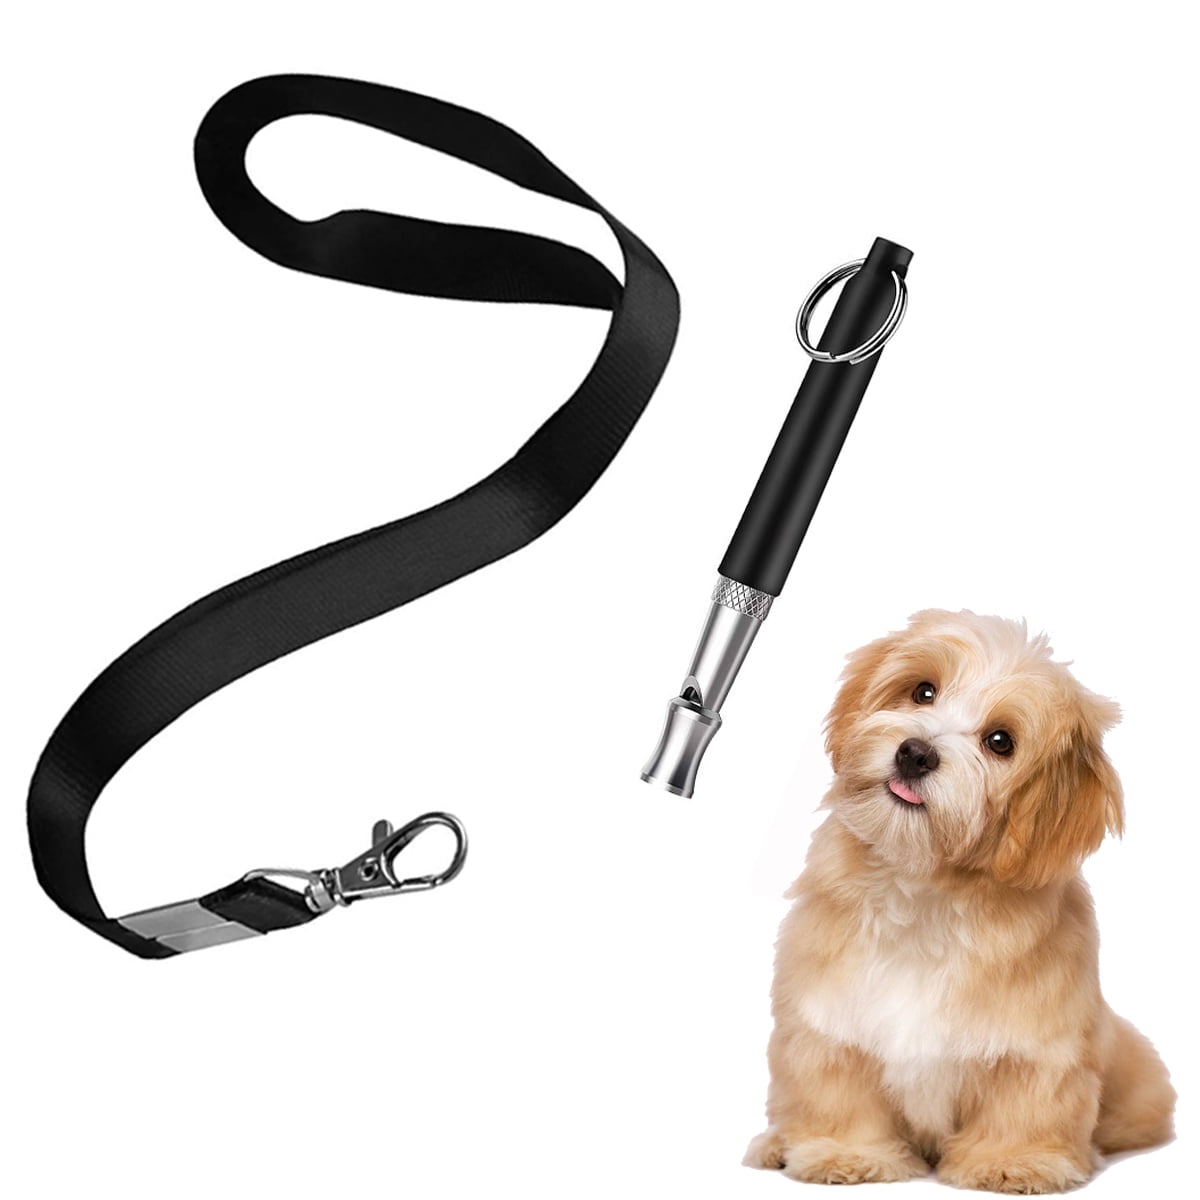 Dog Training Whistle,Adjustable Frequencies,3pcs Ultrasonic Dog Whistle With Lanyard & Dog Training Clicker for Recall and Barking Control,Ideal for dog training,Professional High Pitch Dog Clicker